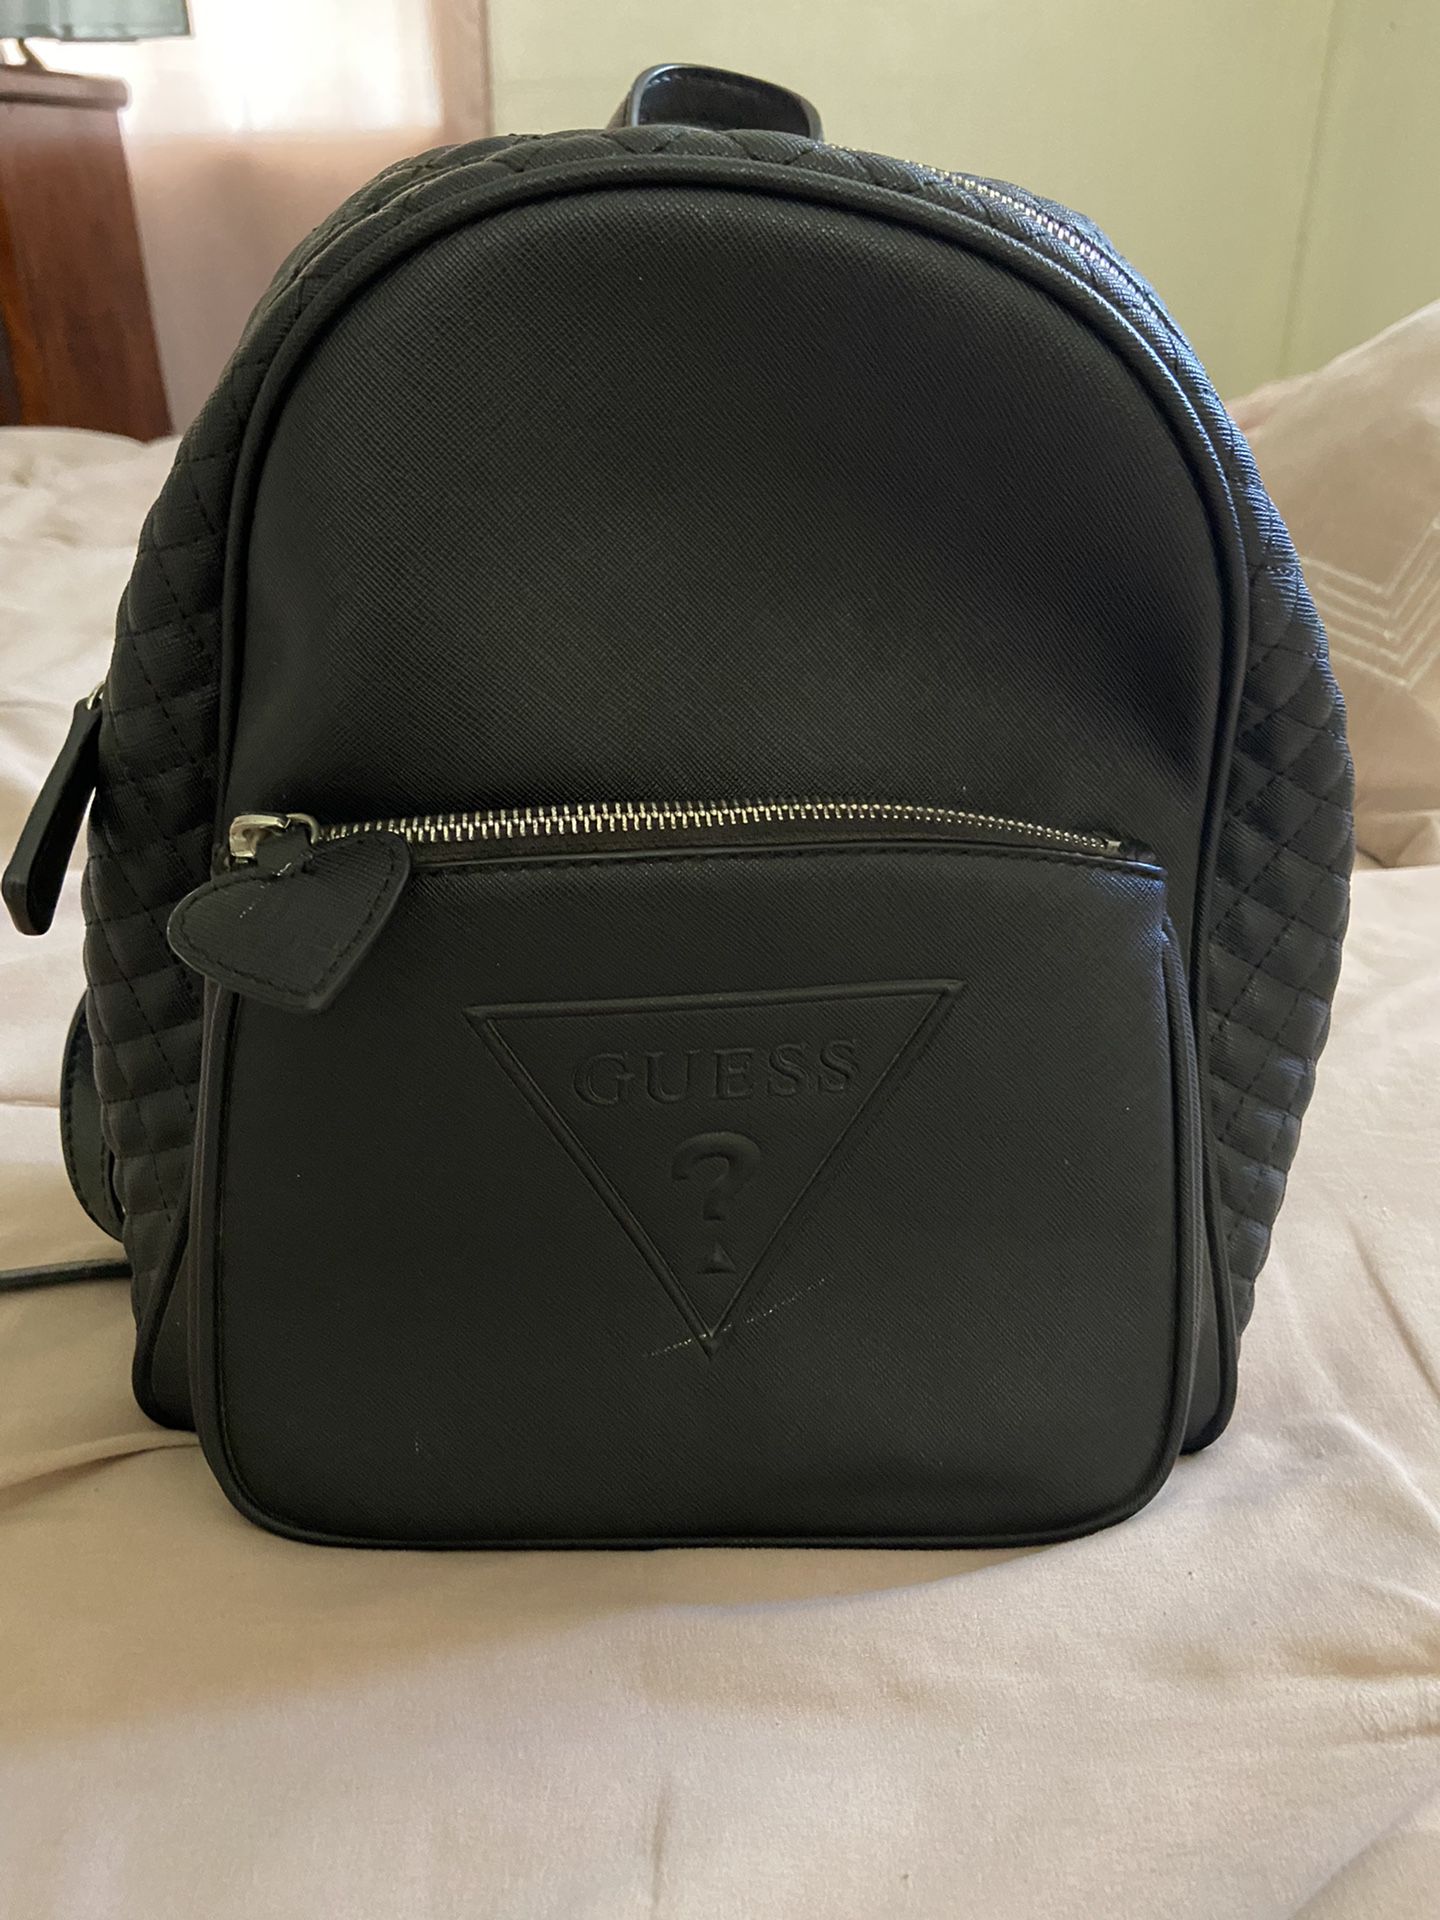 Guess Black Backpack 